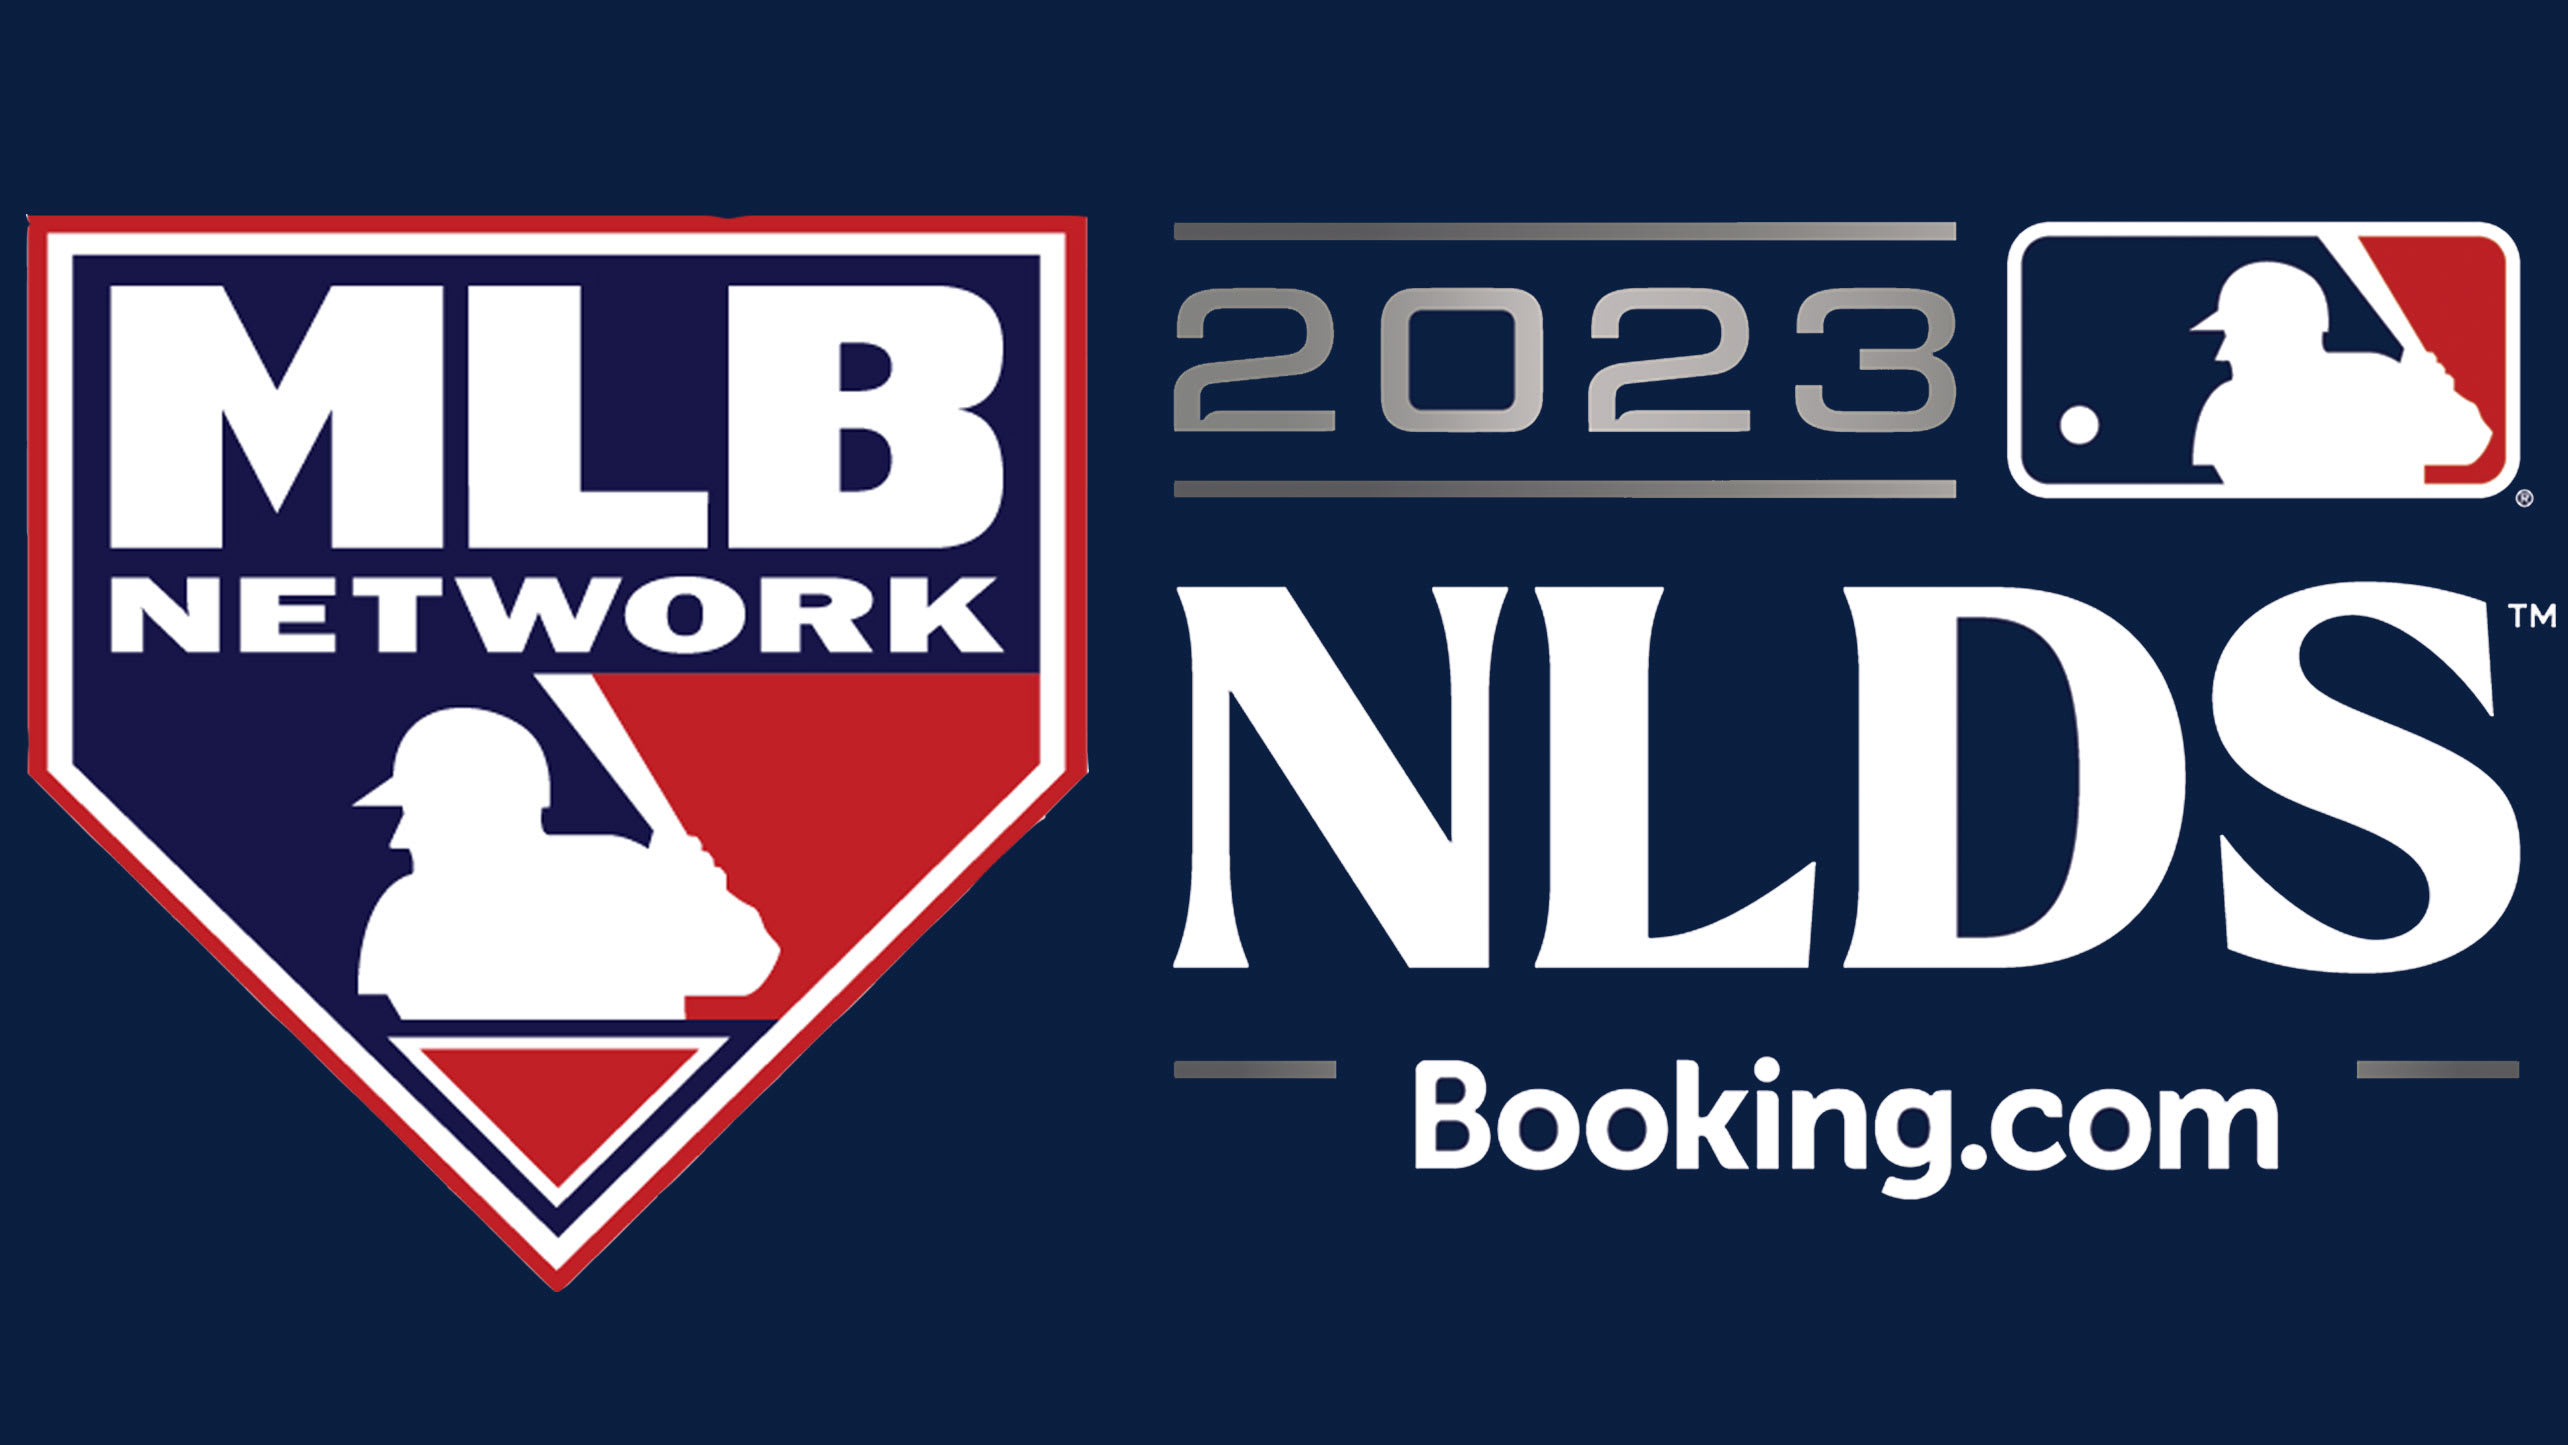 MLB Network and 2023 NLDS logos